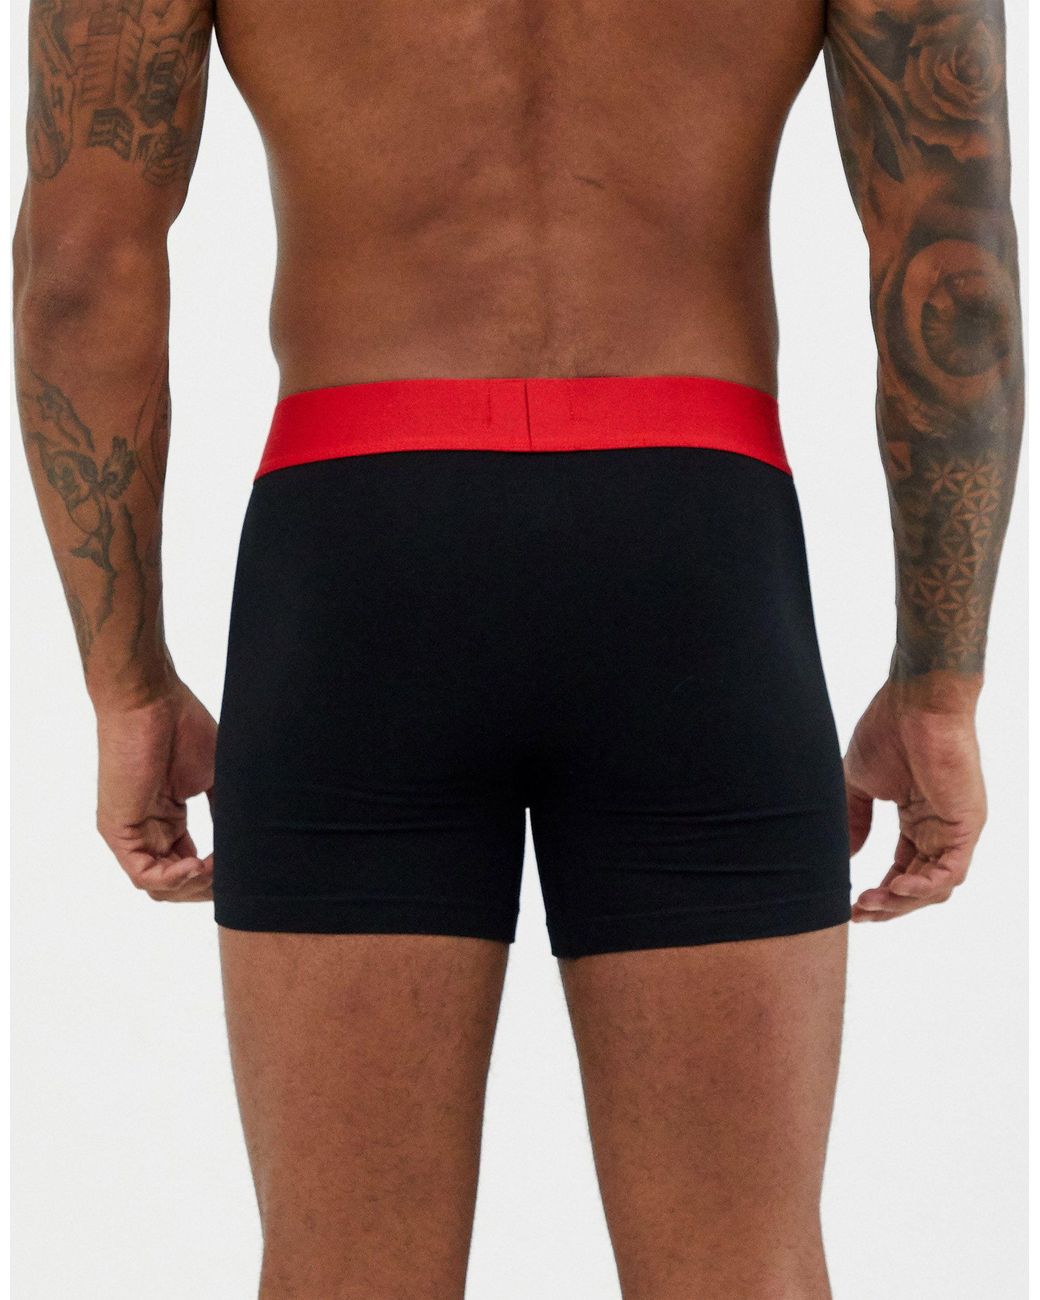 HUGO - Two-pack of stretch-cotton boxer briefs with logos